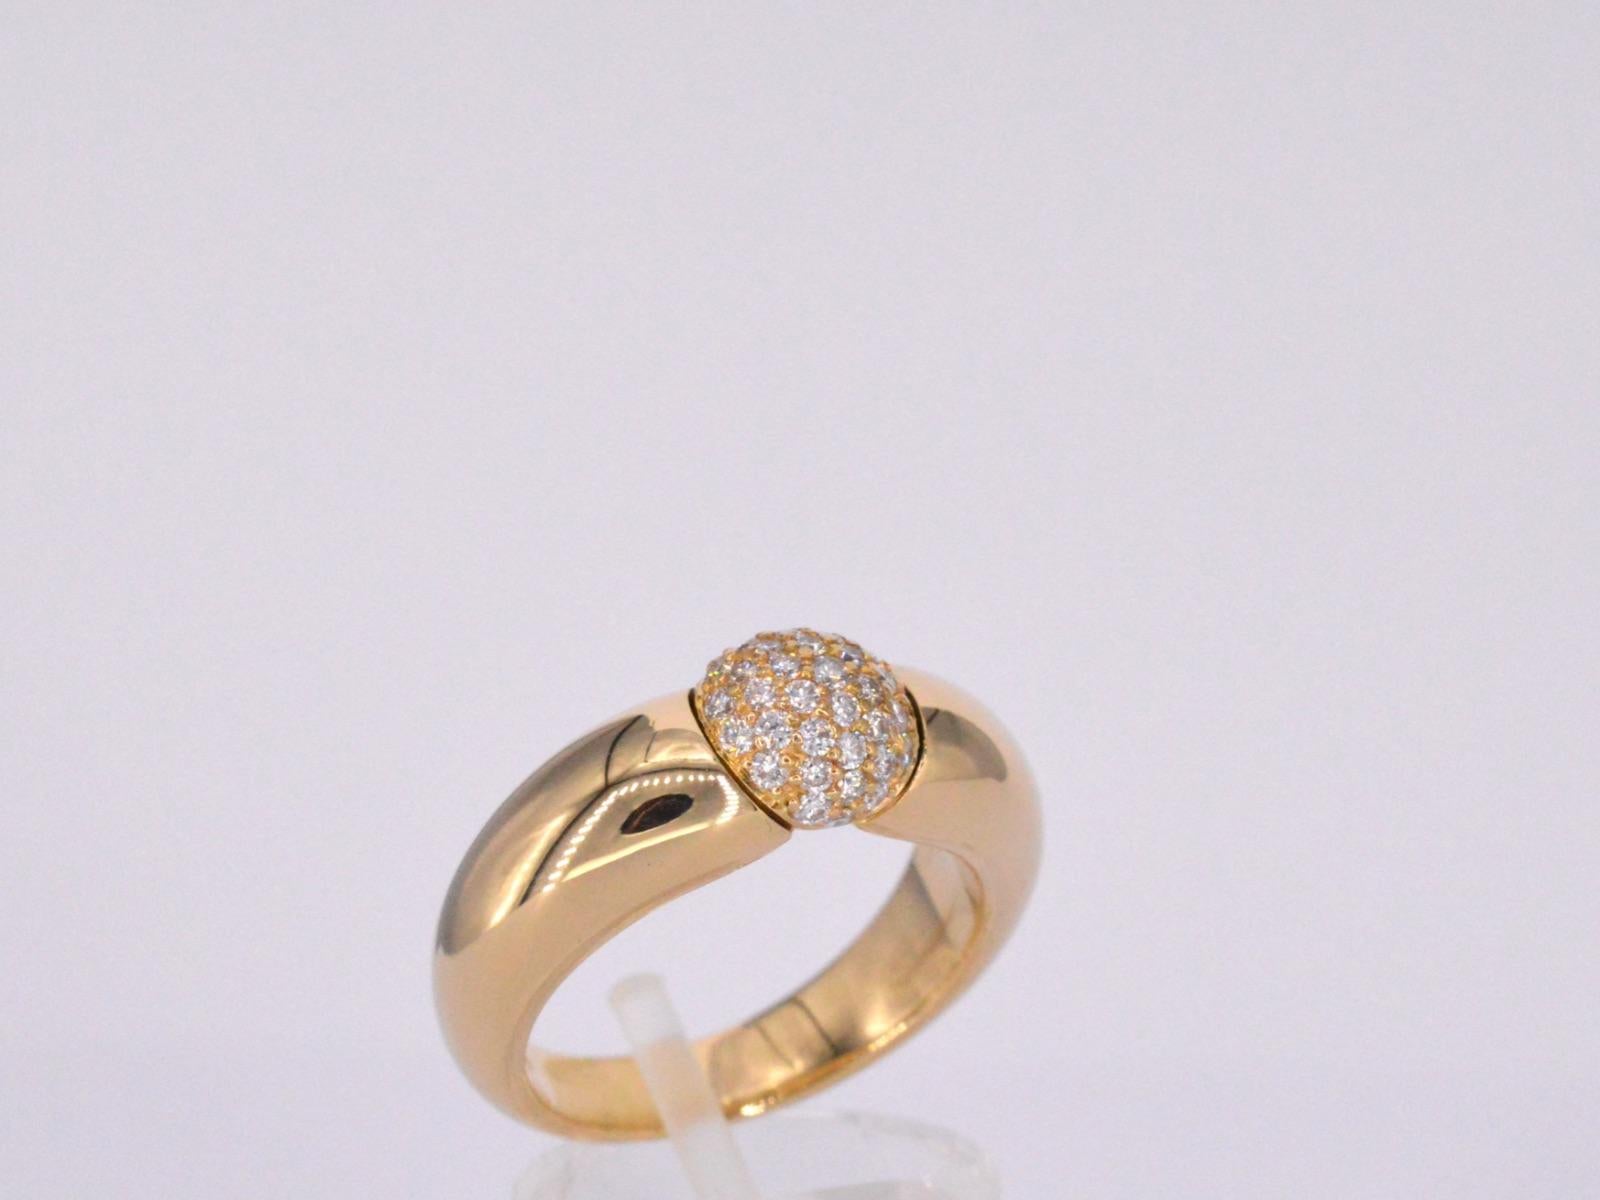 Women's or Men's Golden Lechic ring with diamonds For Sale